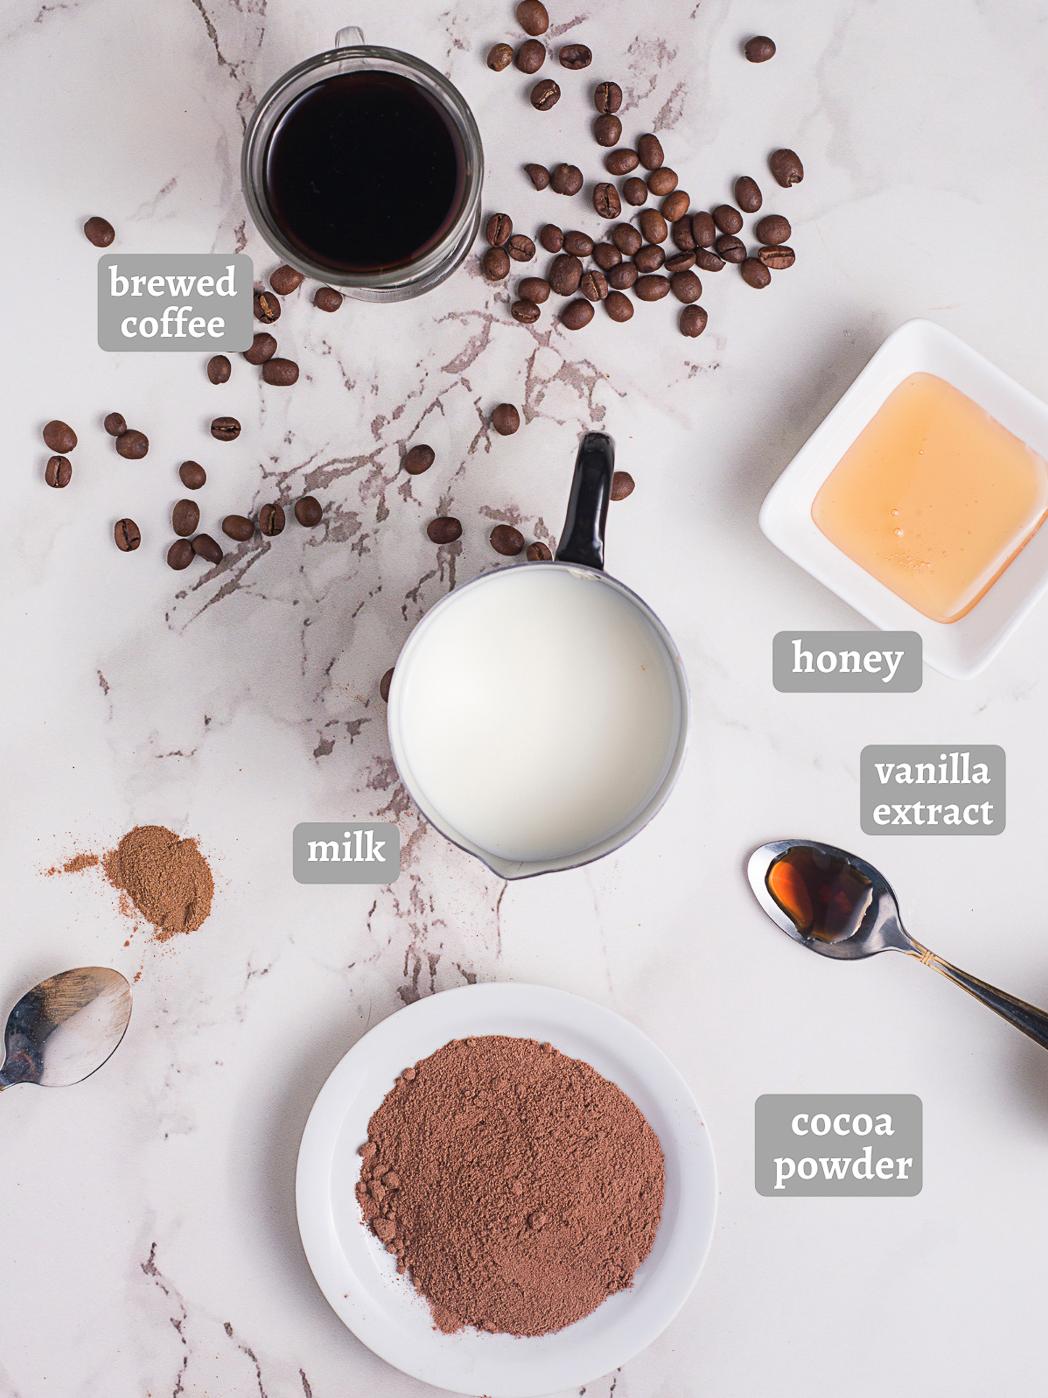  Start your morning off right with a cup of lite mocha coffee made from this scrumptious mix.